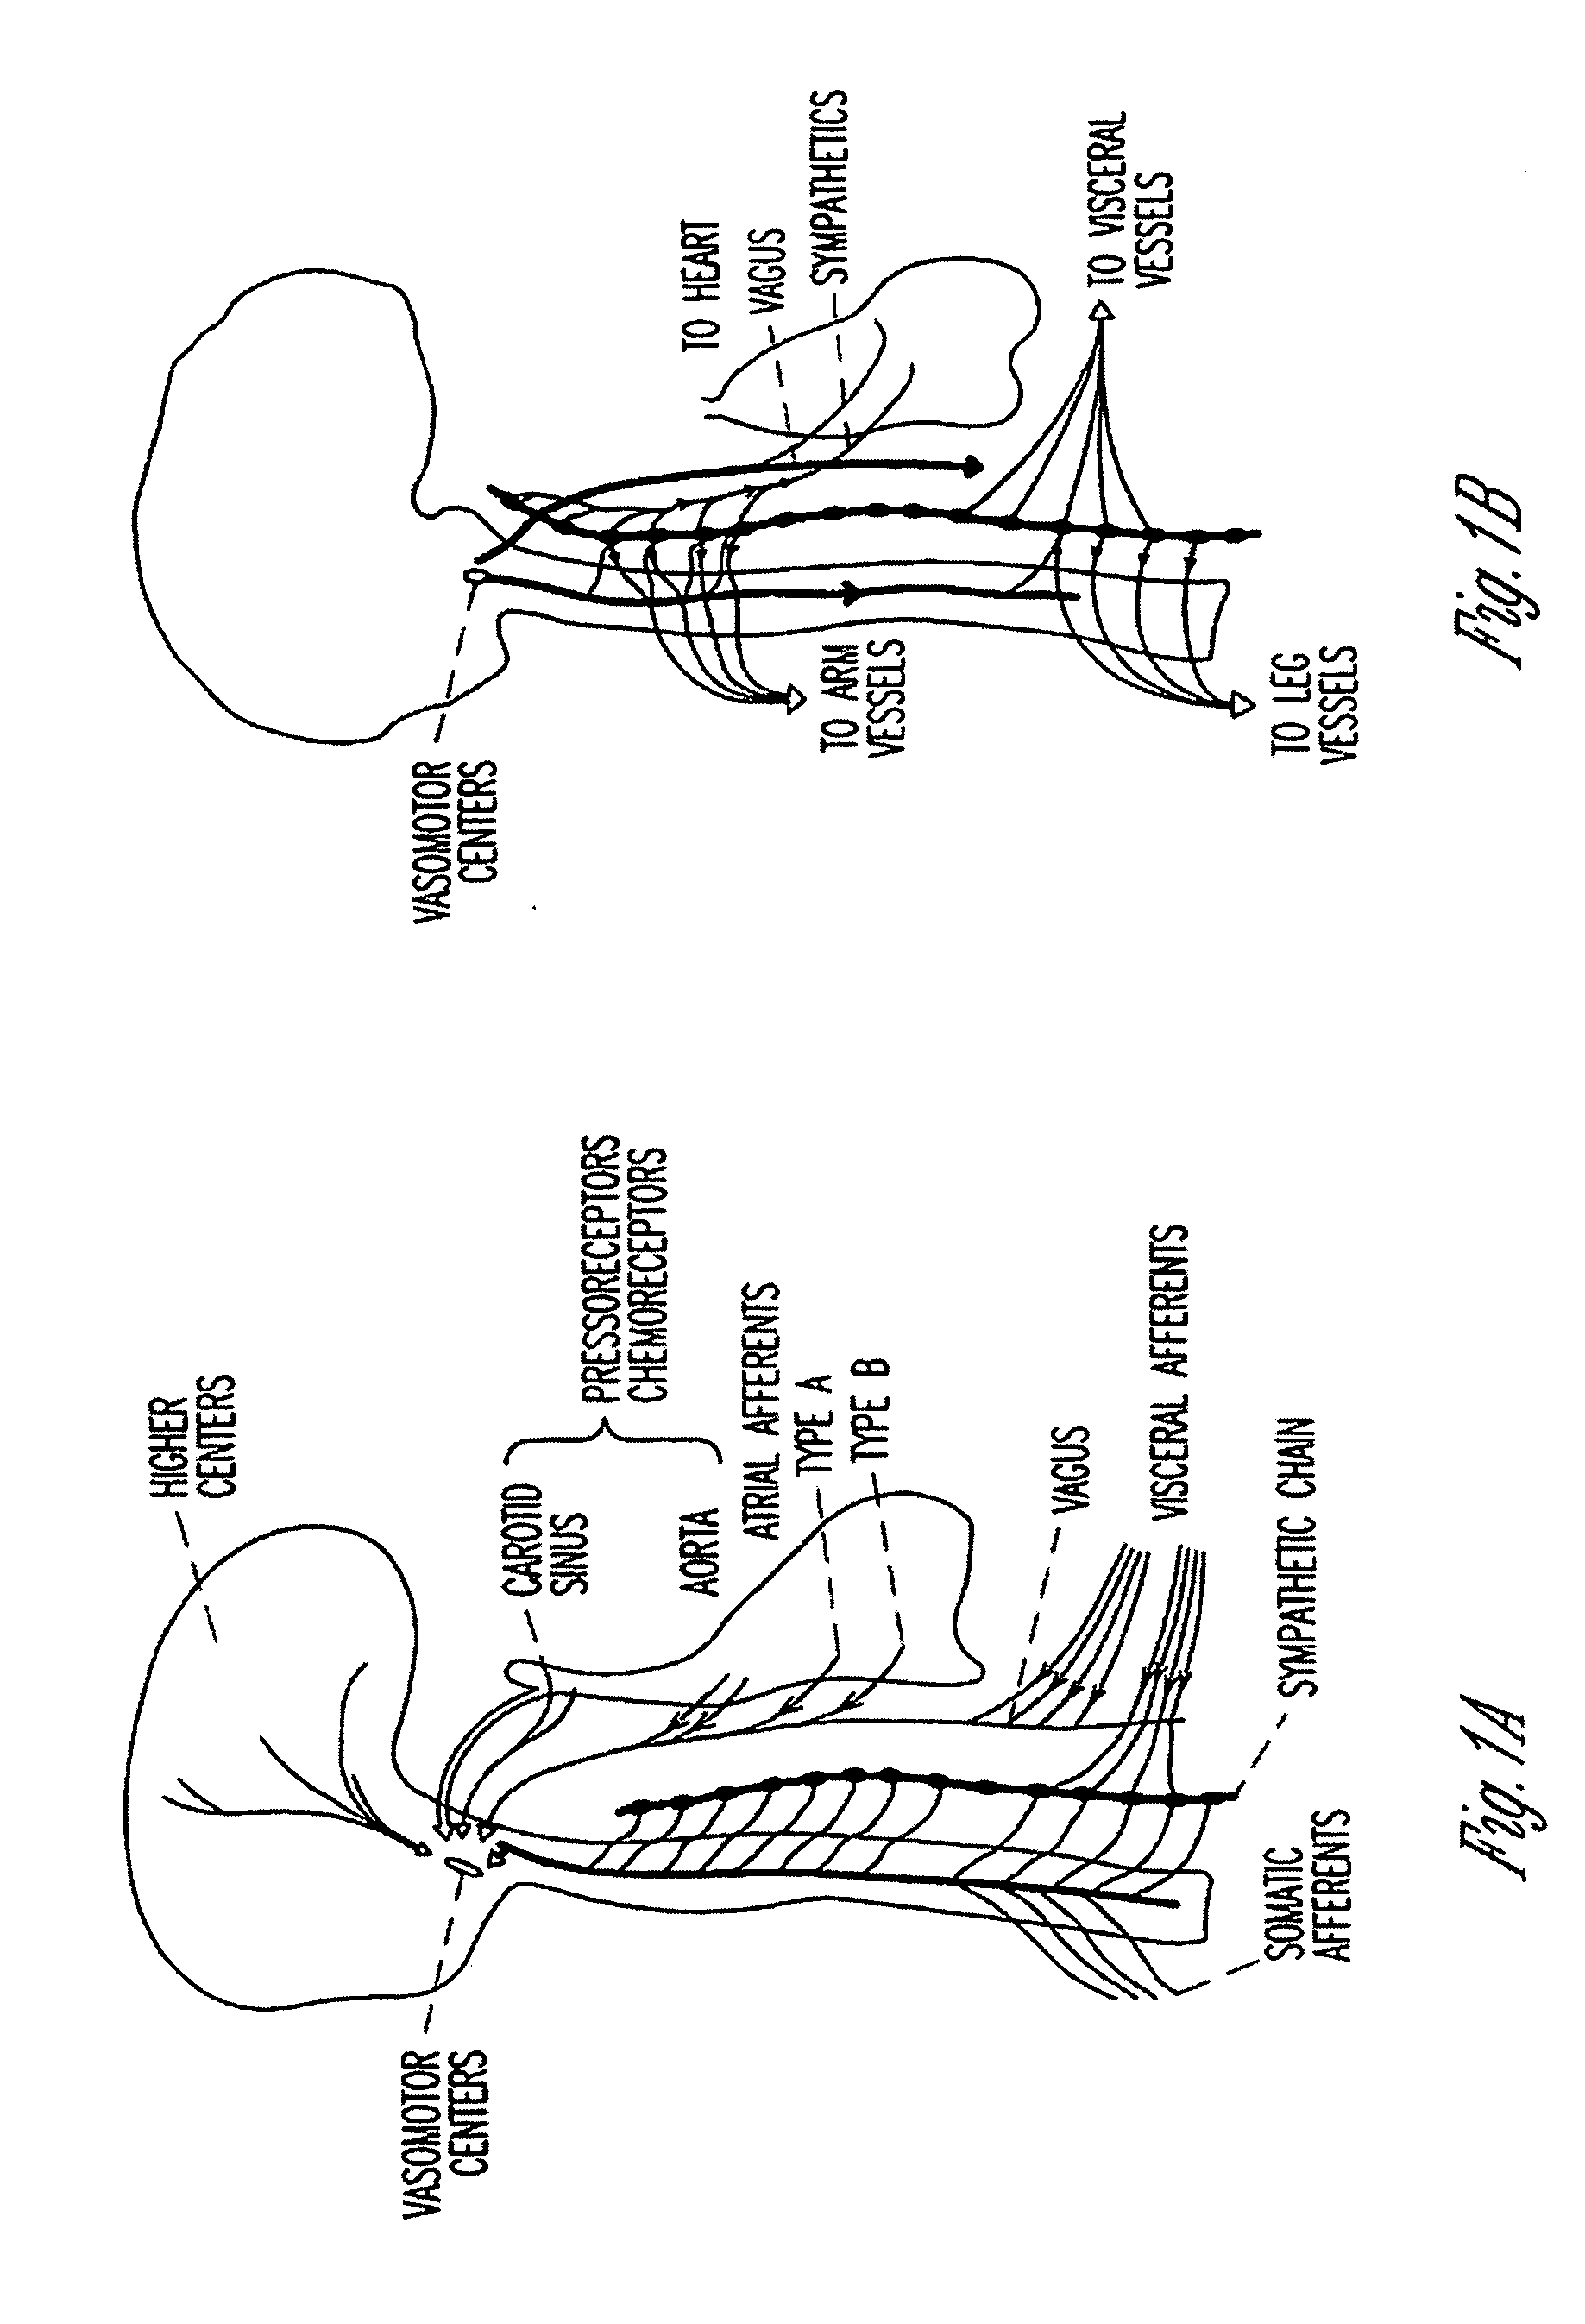 Adaptive baroreflex stimulation therapy for disordered breathing